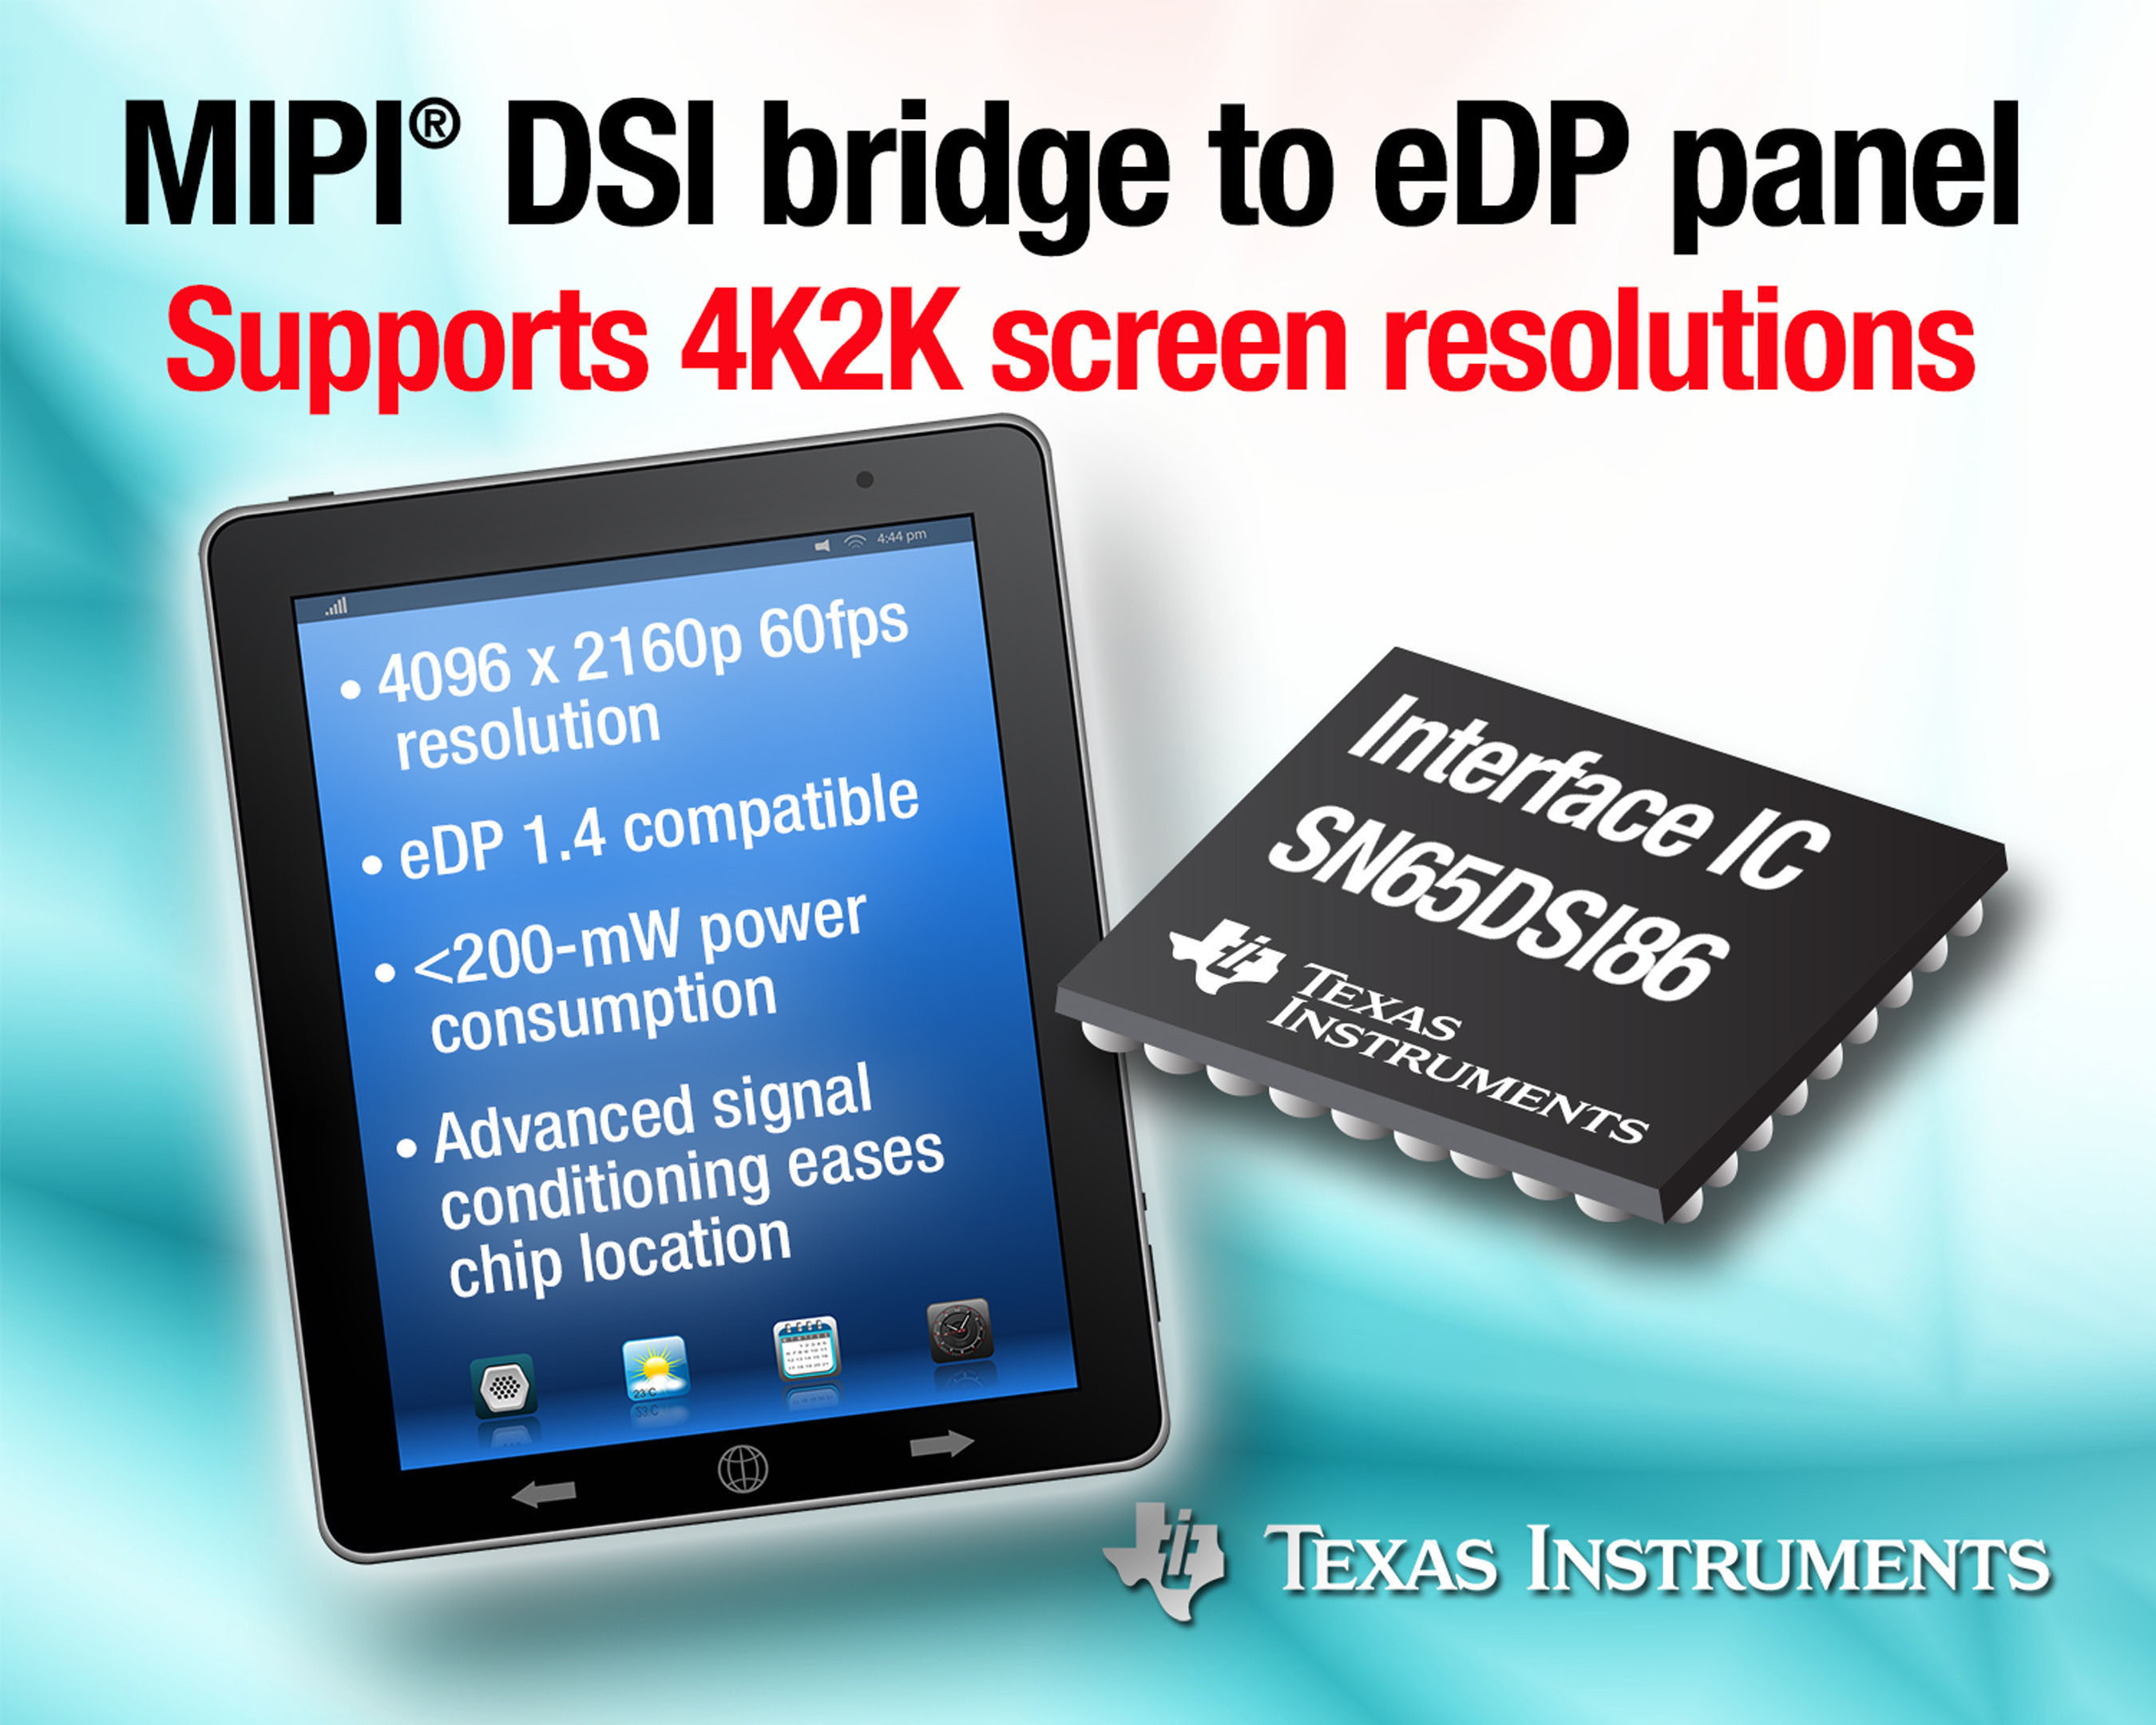 TI's SN65DSI86 interface IC supports the industry's highest screen resolution up to 4K2Kp60. It provides a MIPI DSI bridge between the graphics processor and embedded DisplayPort (eDP) panel. Compared to competitive devices, the SN65DSI86's 1.5-Gbps DSI data rate delivers more than 30-percent higher bandwidth. In addition, its dual MIPI DSI channels in a 20-percent smaller, 5-mm by 5-mm package saves PCB area, providing system designers greater design flexibility for space constrained mobile applications. (PRNewsFoto/Texas Instruments Incorporated) (PRNewsFoto/TEXAS INSTRUMENTS INCORPORATED)